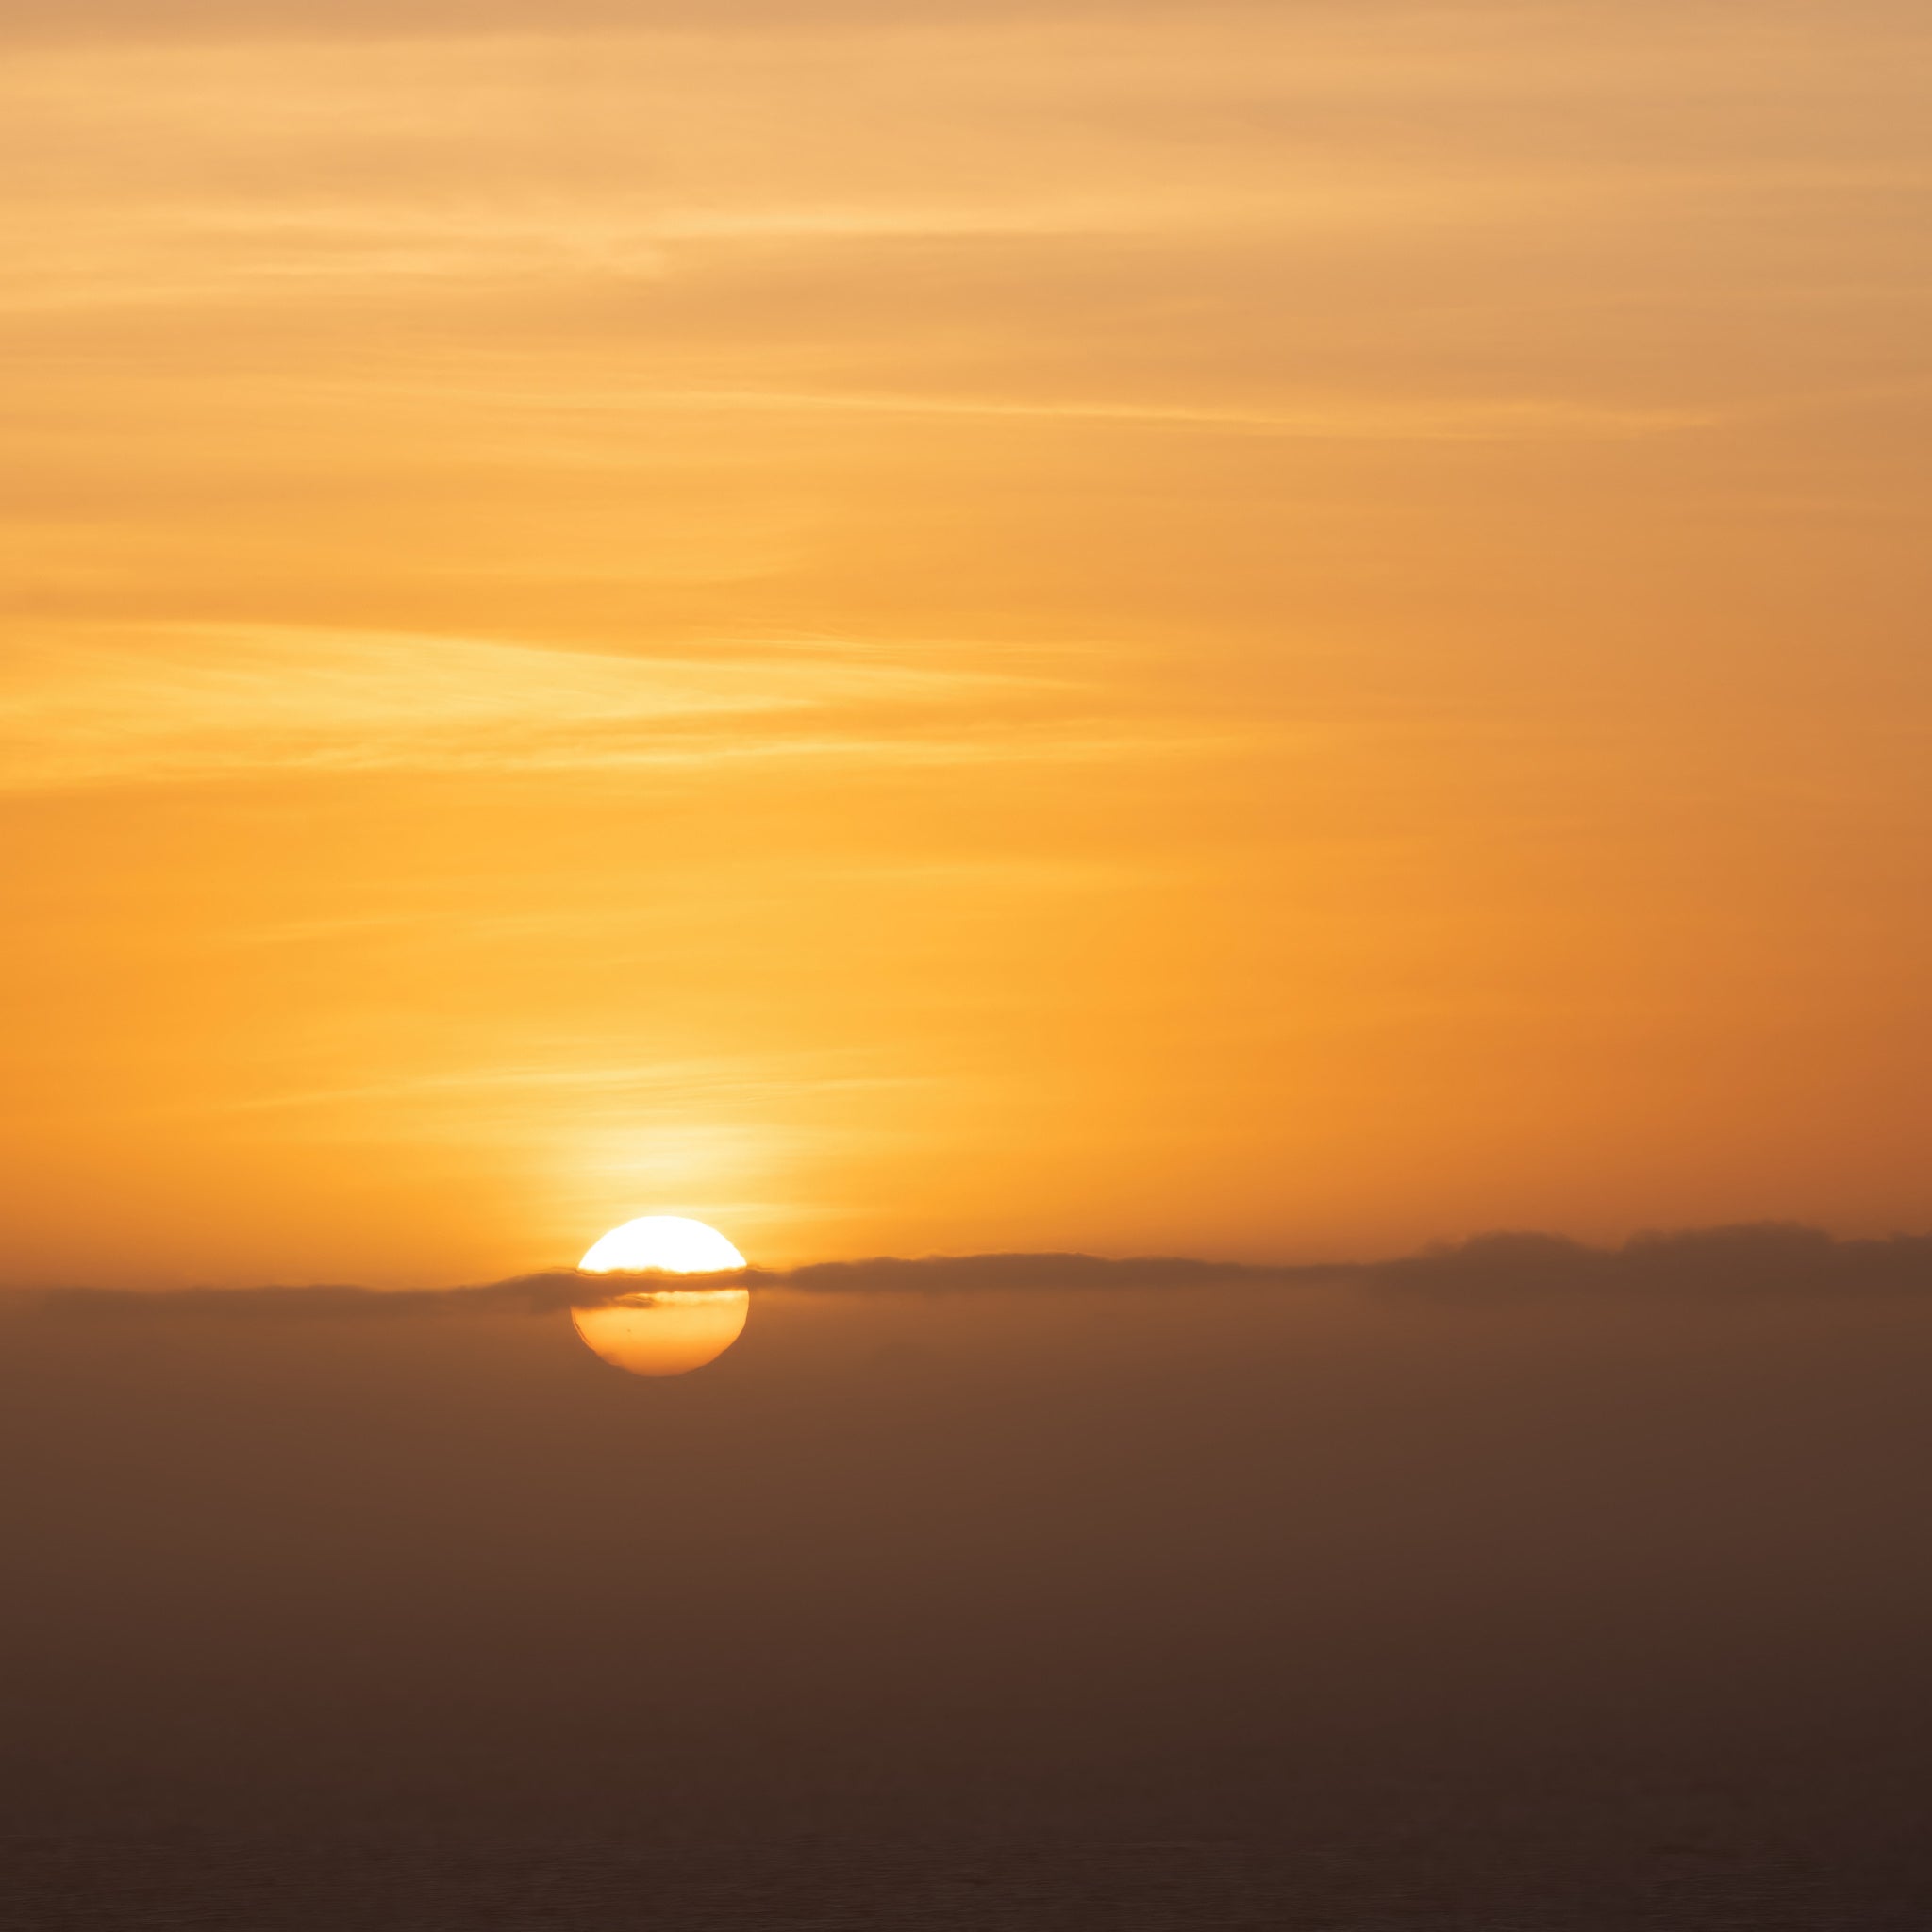 The sun highlights low clouds on the horizon during a spectacular sunrise over the ocean near Freycenet in Tasmania, Australia. As an added bonus I also captured a pair of sunspots in the image.